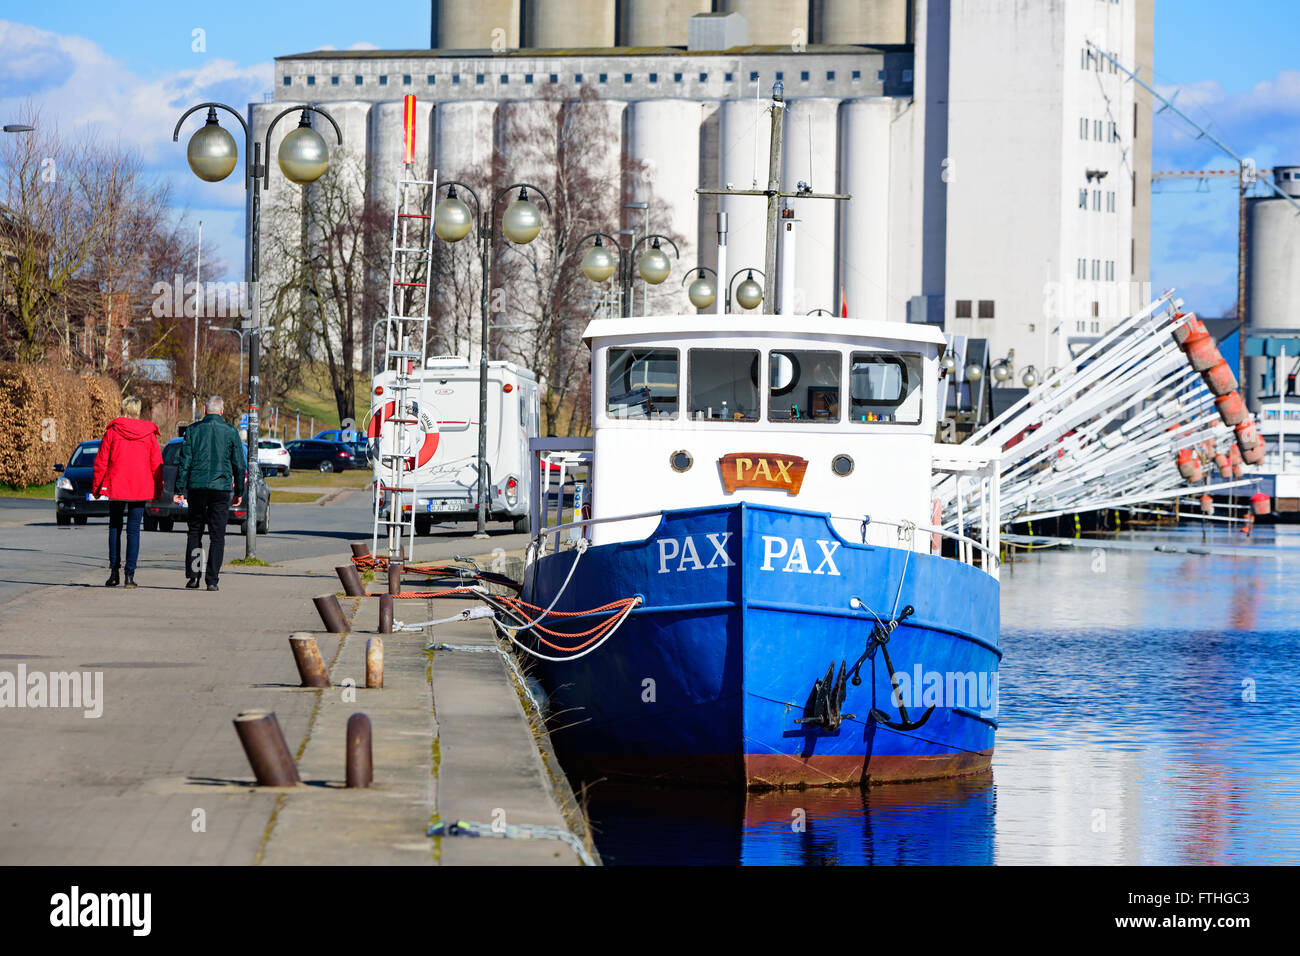 Ahus, Sweden - March 20, 2016: People walking beside a fishing boat in the marina with some industrial buildings in the backgrou Stock Photo